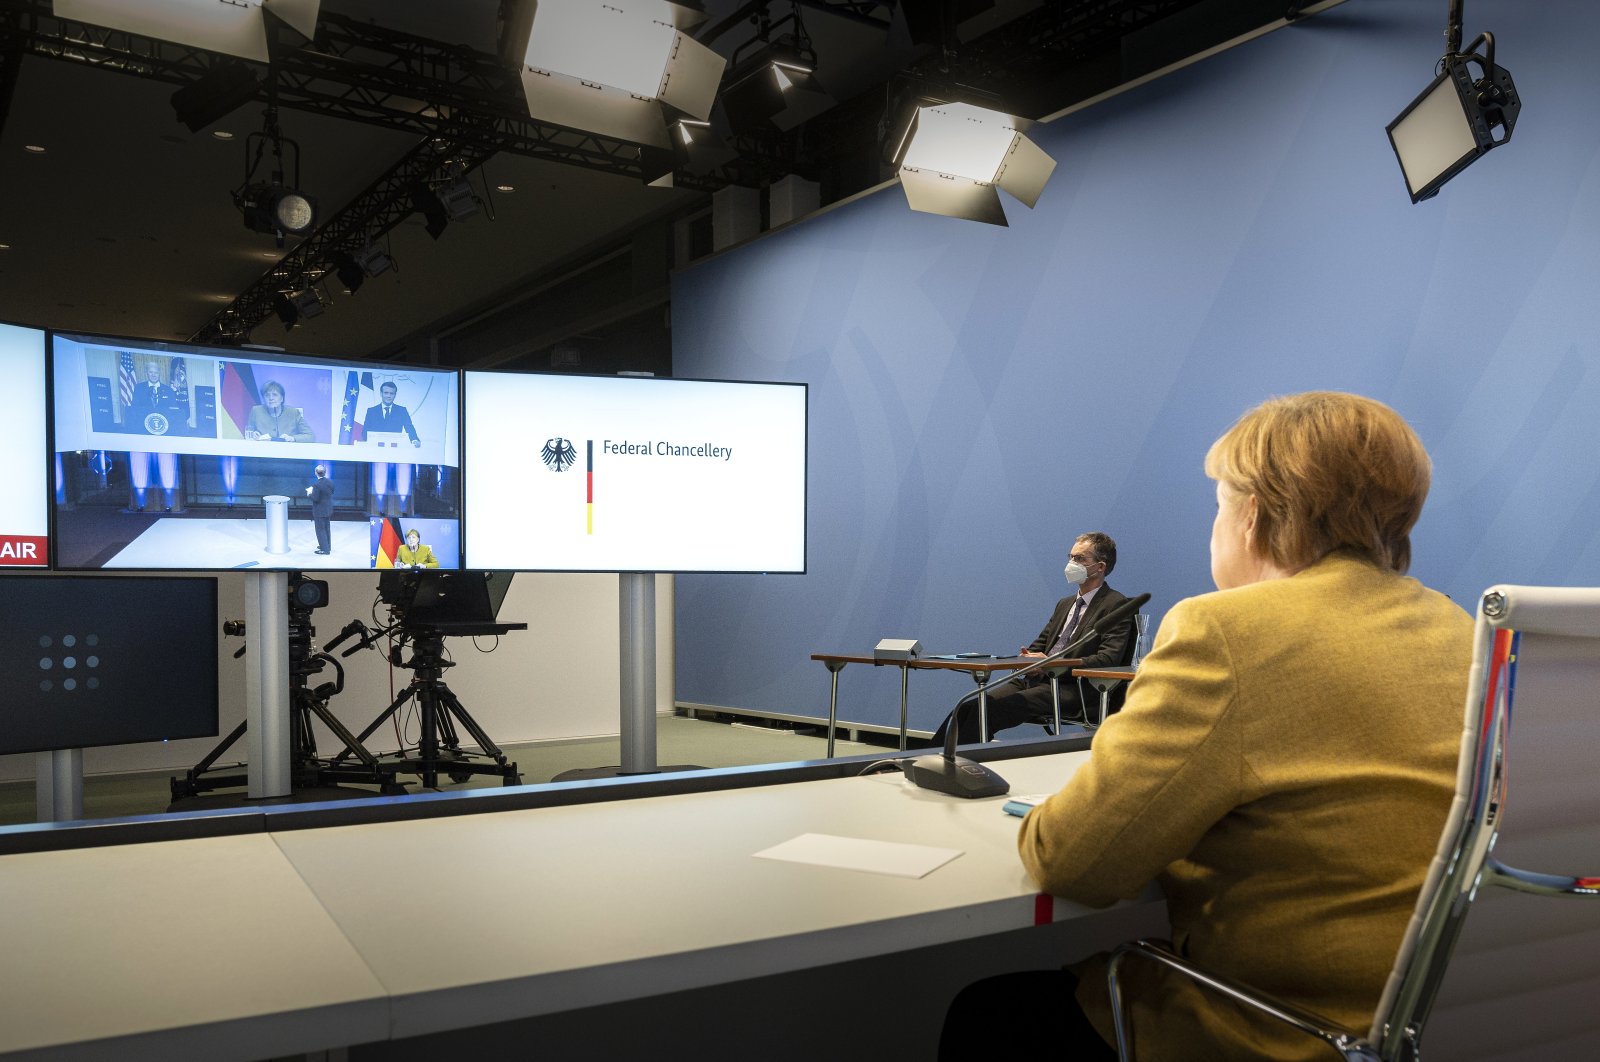 German Chancellor Angela Merkel attends the online Munich Security Conference with U.S. President Joe Biden and French President Emmanuel Macron (on the screen), Berlin, Germany, Feb. 19, 2021. (Photo by Getty Images)